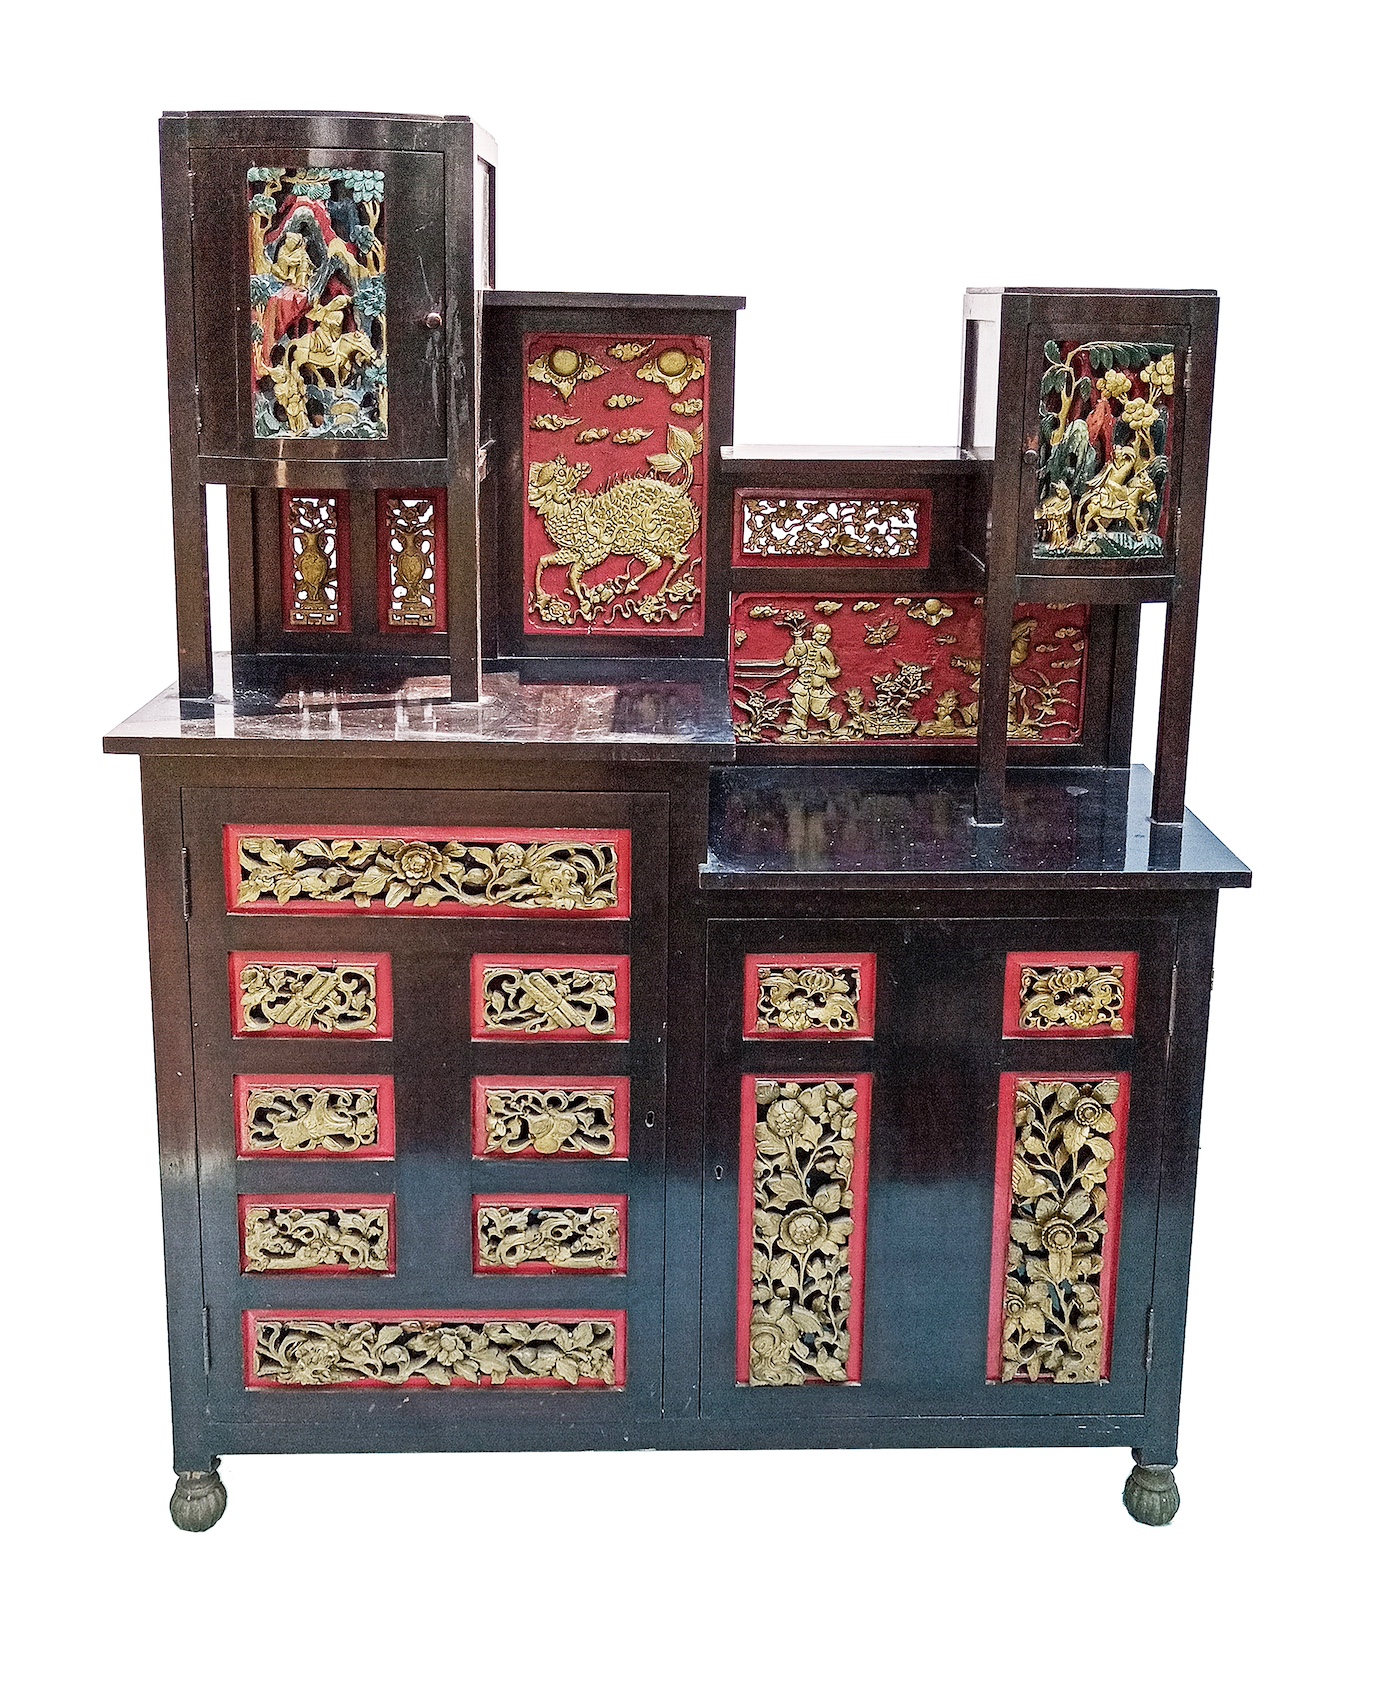 A modern Chinese style red and gold carved cabinet